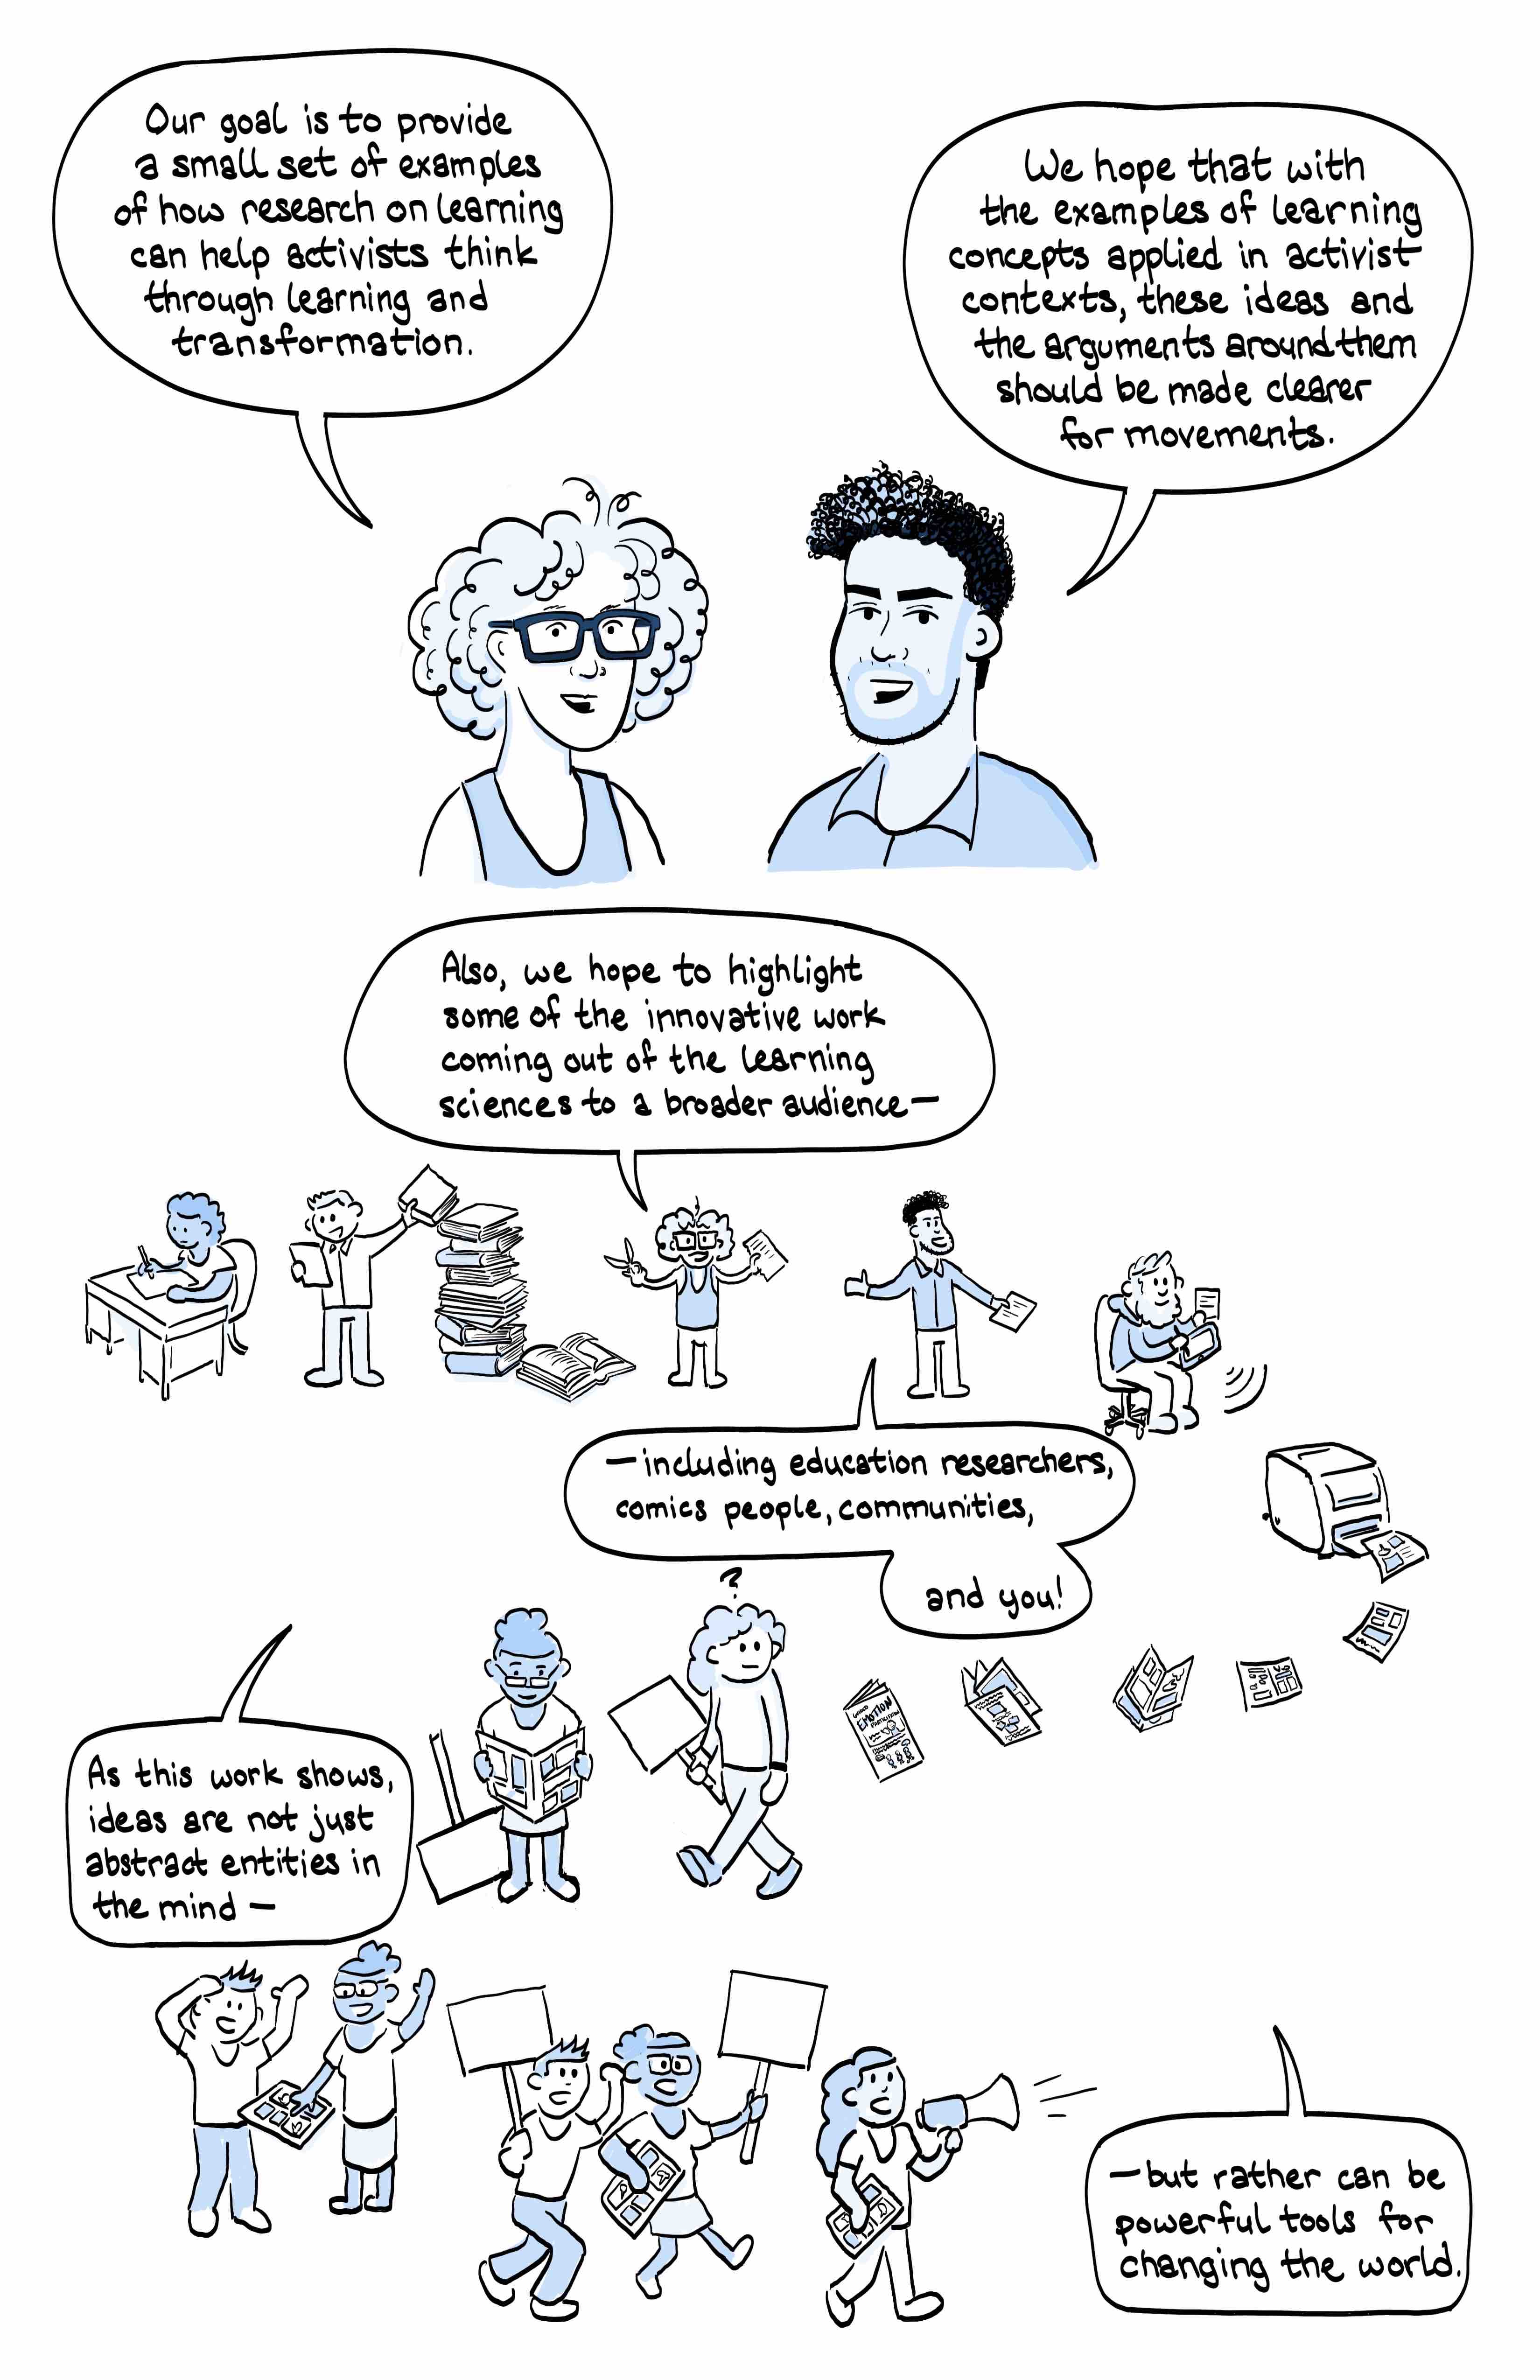 Page 5. Image of Joe and Tanner together. Joe speech bubble says: Our goal is to provide a small set of examples of how research on learning can help activists to think through learning and transformation.
Tanner speech bubble says: We hope that with examples of learning concepts applied in activist contexts, these ideas and the arguments around them should be made clearer for movements. 
 
Lower half of page:
Images connect in zig zag across the page to show progression. 
Image 1: person at desk writing. 
Image 2: man reading paper and stacking it on a tall pile of books. 
Image 3: Joe with scissors in one hand, paper in the other hand, saying: Also, we hope to highlight some of the innovative work coming out of the learning sciences to a broader audience-
Image4: Tanner with paper in one hand saying including education researchers, comics people, communities, and you!
Image 5: Andrew illustrating the paper contents onto an ipad
Image 6: Printer with pages flying off and around the corner
Image 7 Activist with placard sees a page
Image 8: Activist reads this comic
Image 9: word bubble from joe and tanner: As this work shows, ideas are not just abstract entities in the mind,
 
Image 10: Activist sharing comic with another person
Image 11: Activists going to rally with placards with comics in hand
Image 12 word bubble from Joe and Tanner: but rather can be powerful tools for changing the world.
